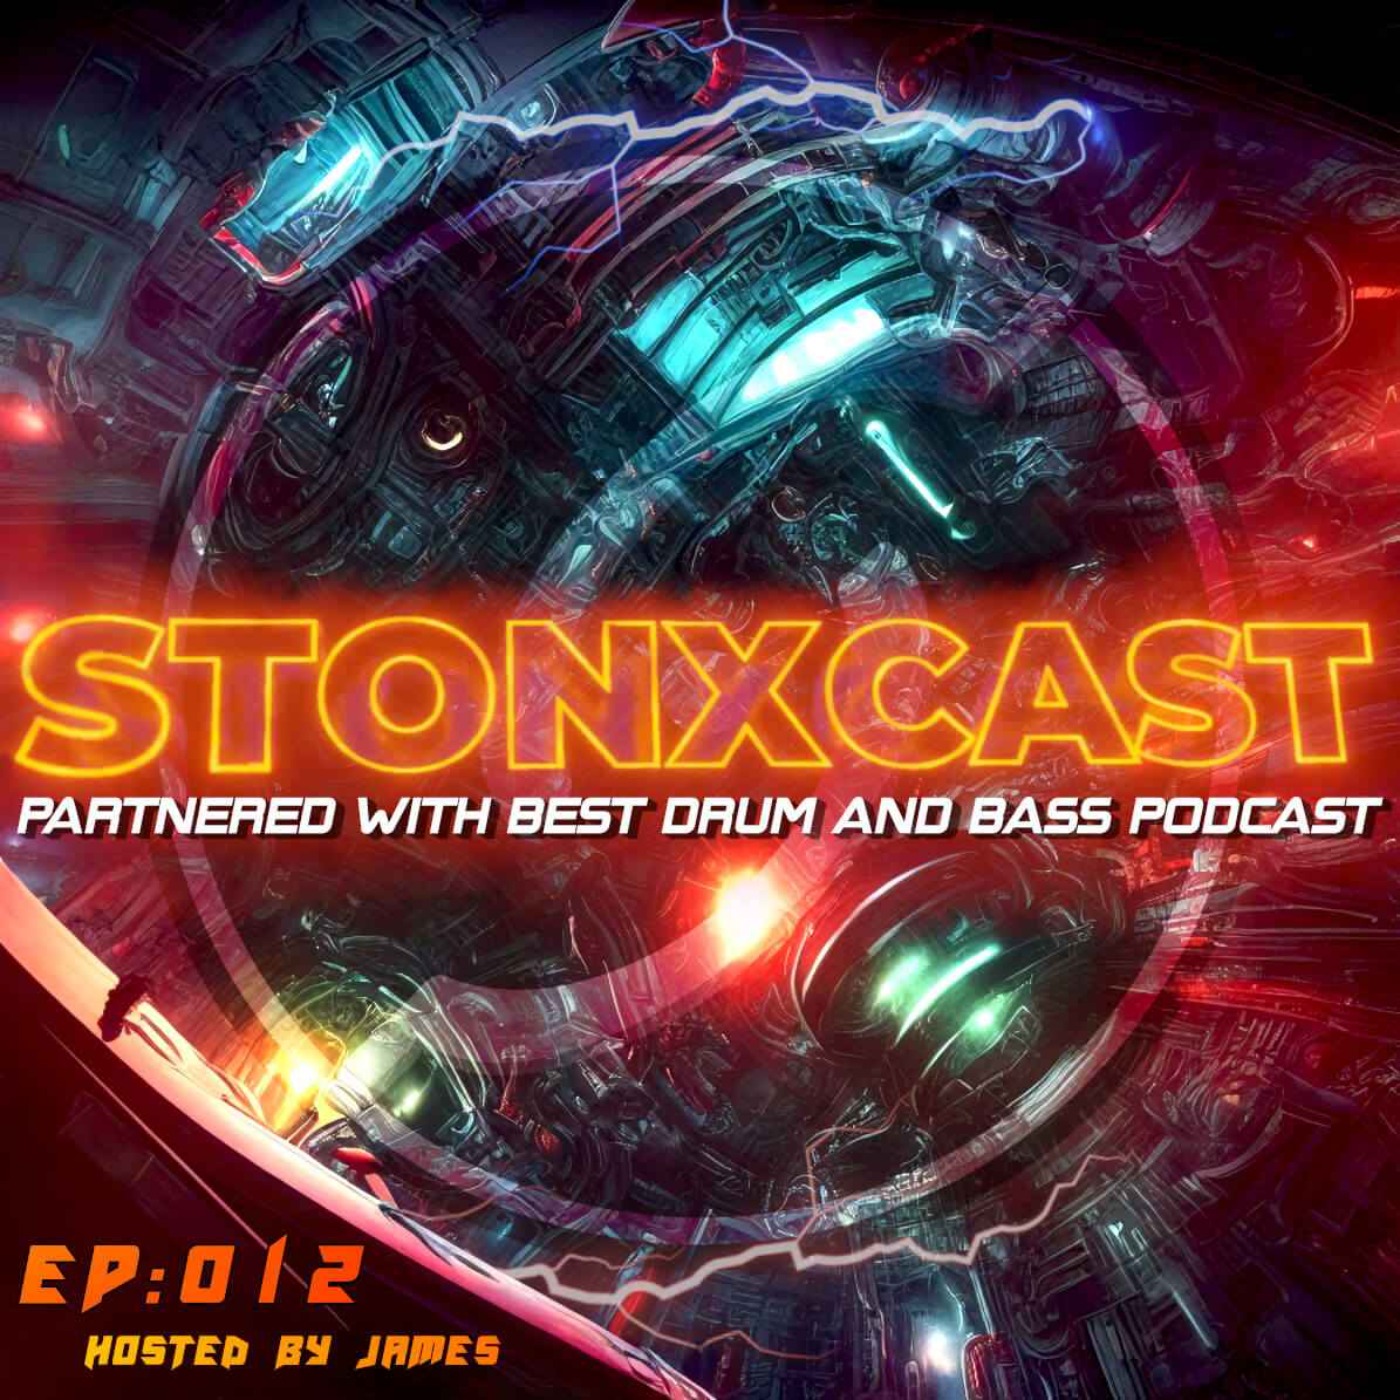  Stonxcast EP:012 - Hosted by James Artwork